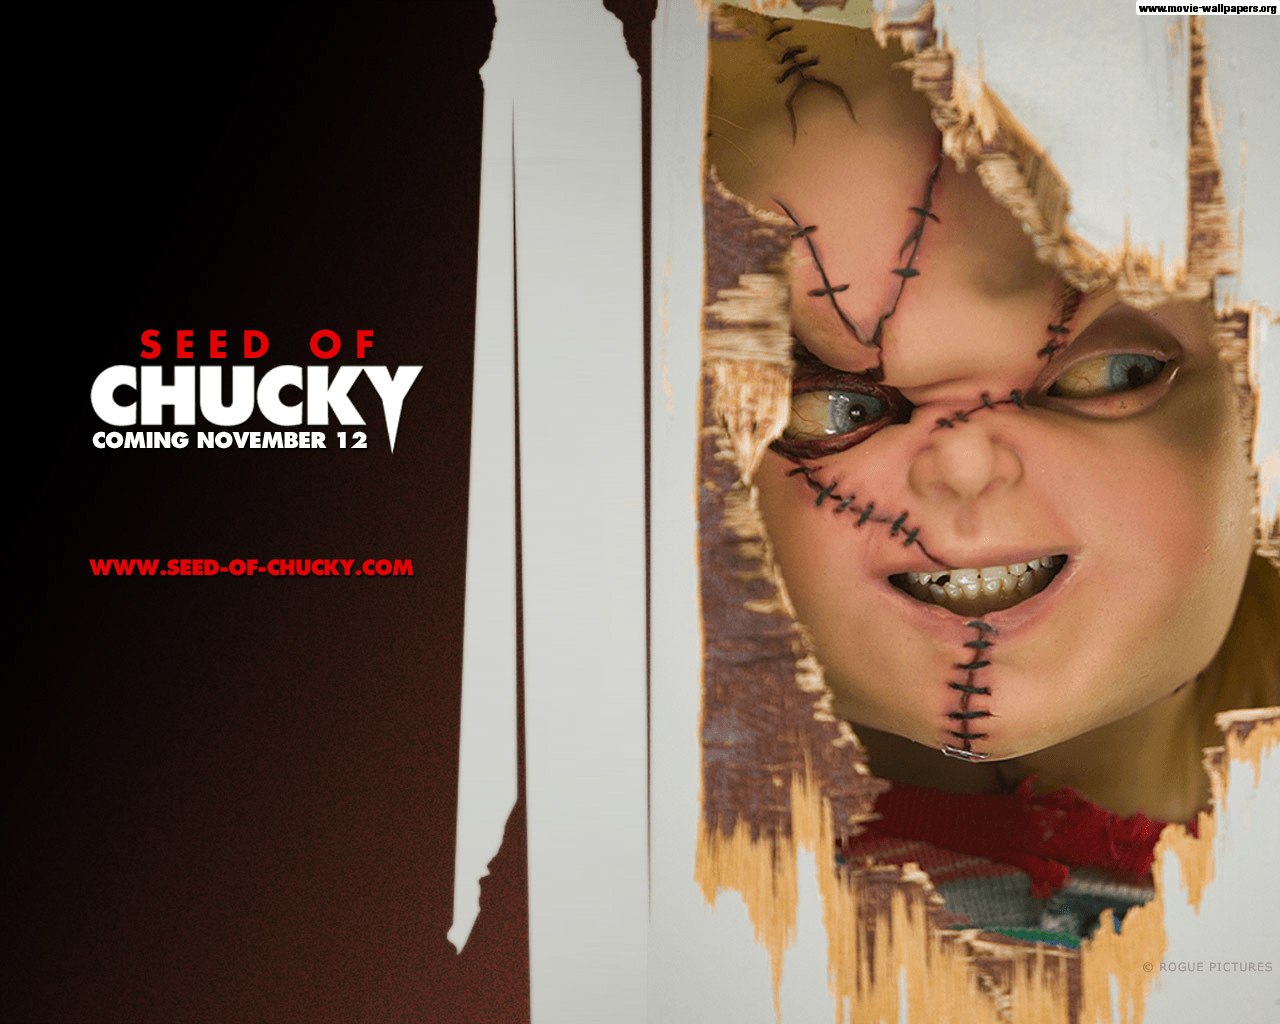 Childs Play 2 Chucky wallpaper by ShadEO9  Download on ZEDGE  6b6d